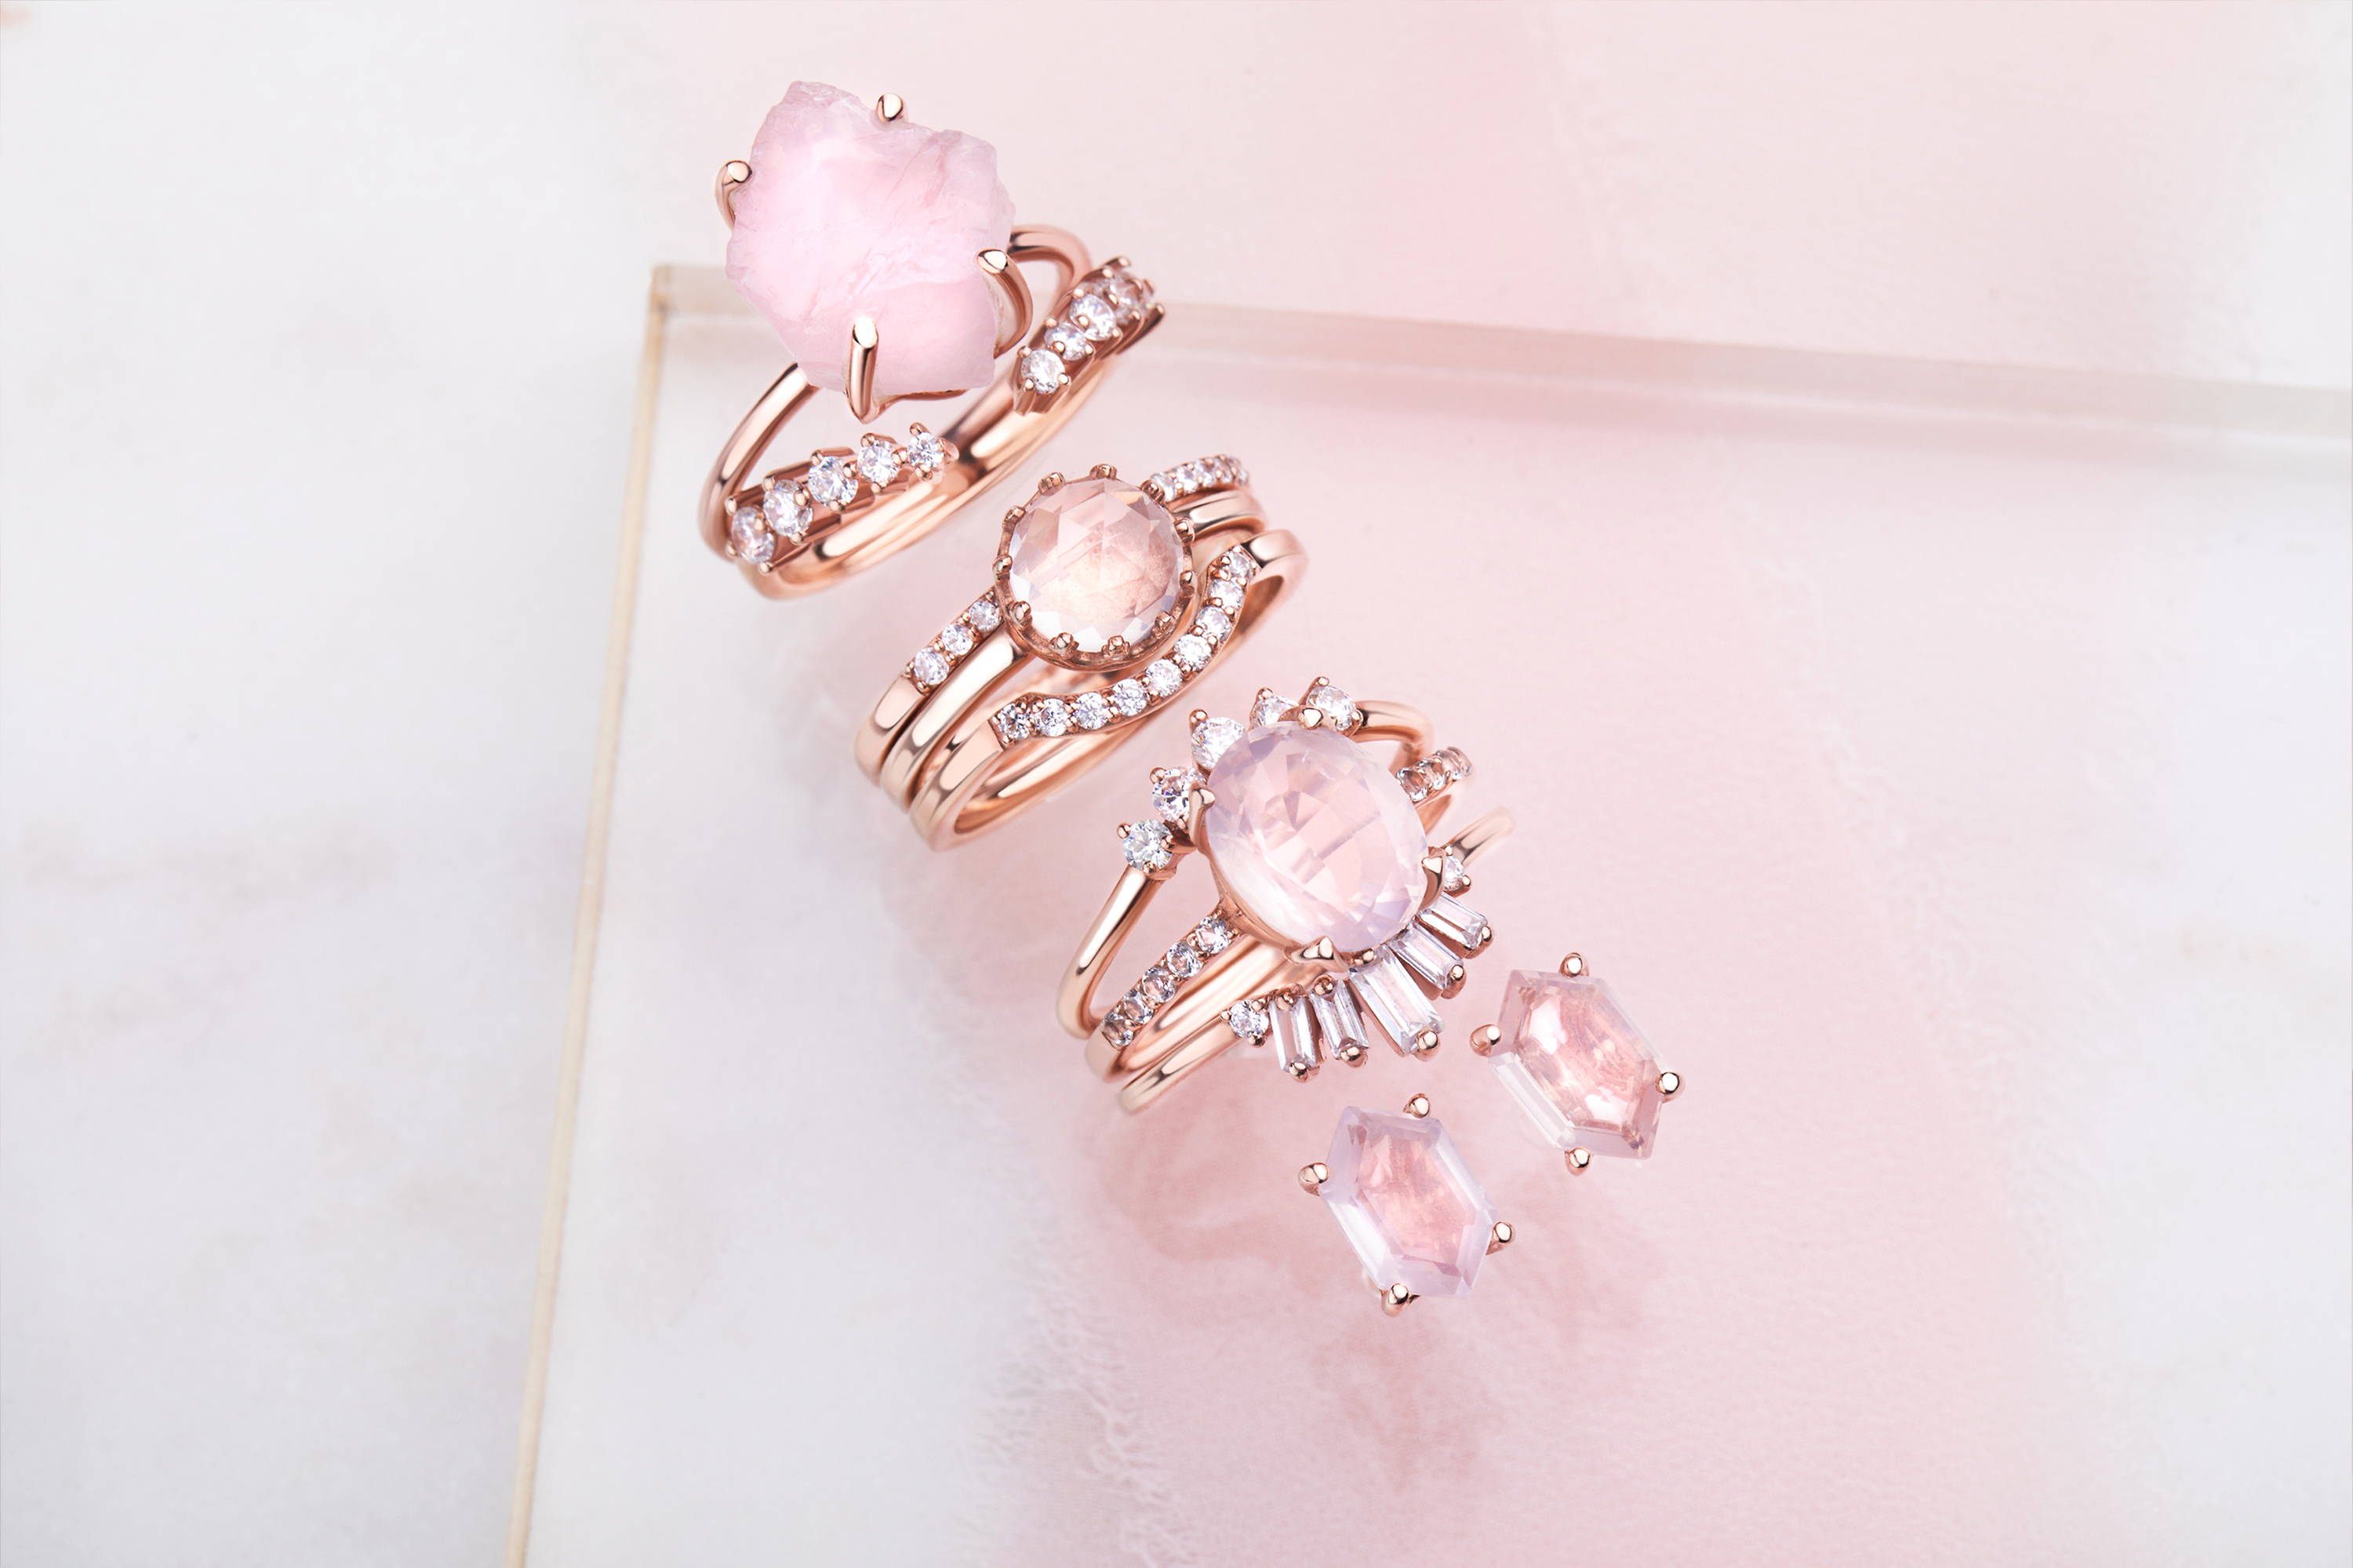 A collection of different Rose Quartz Rings, Stackable Rings and a pair of Rose Quartz Earrings.